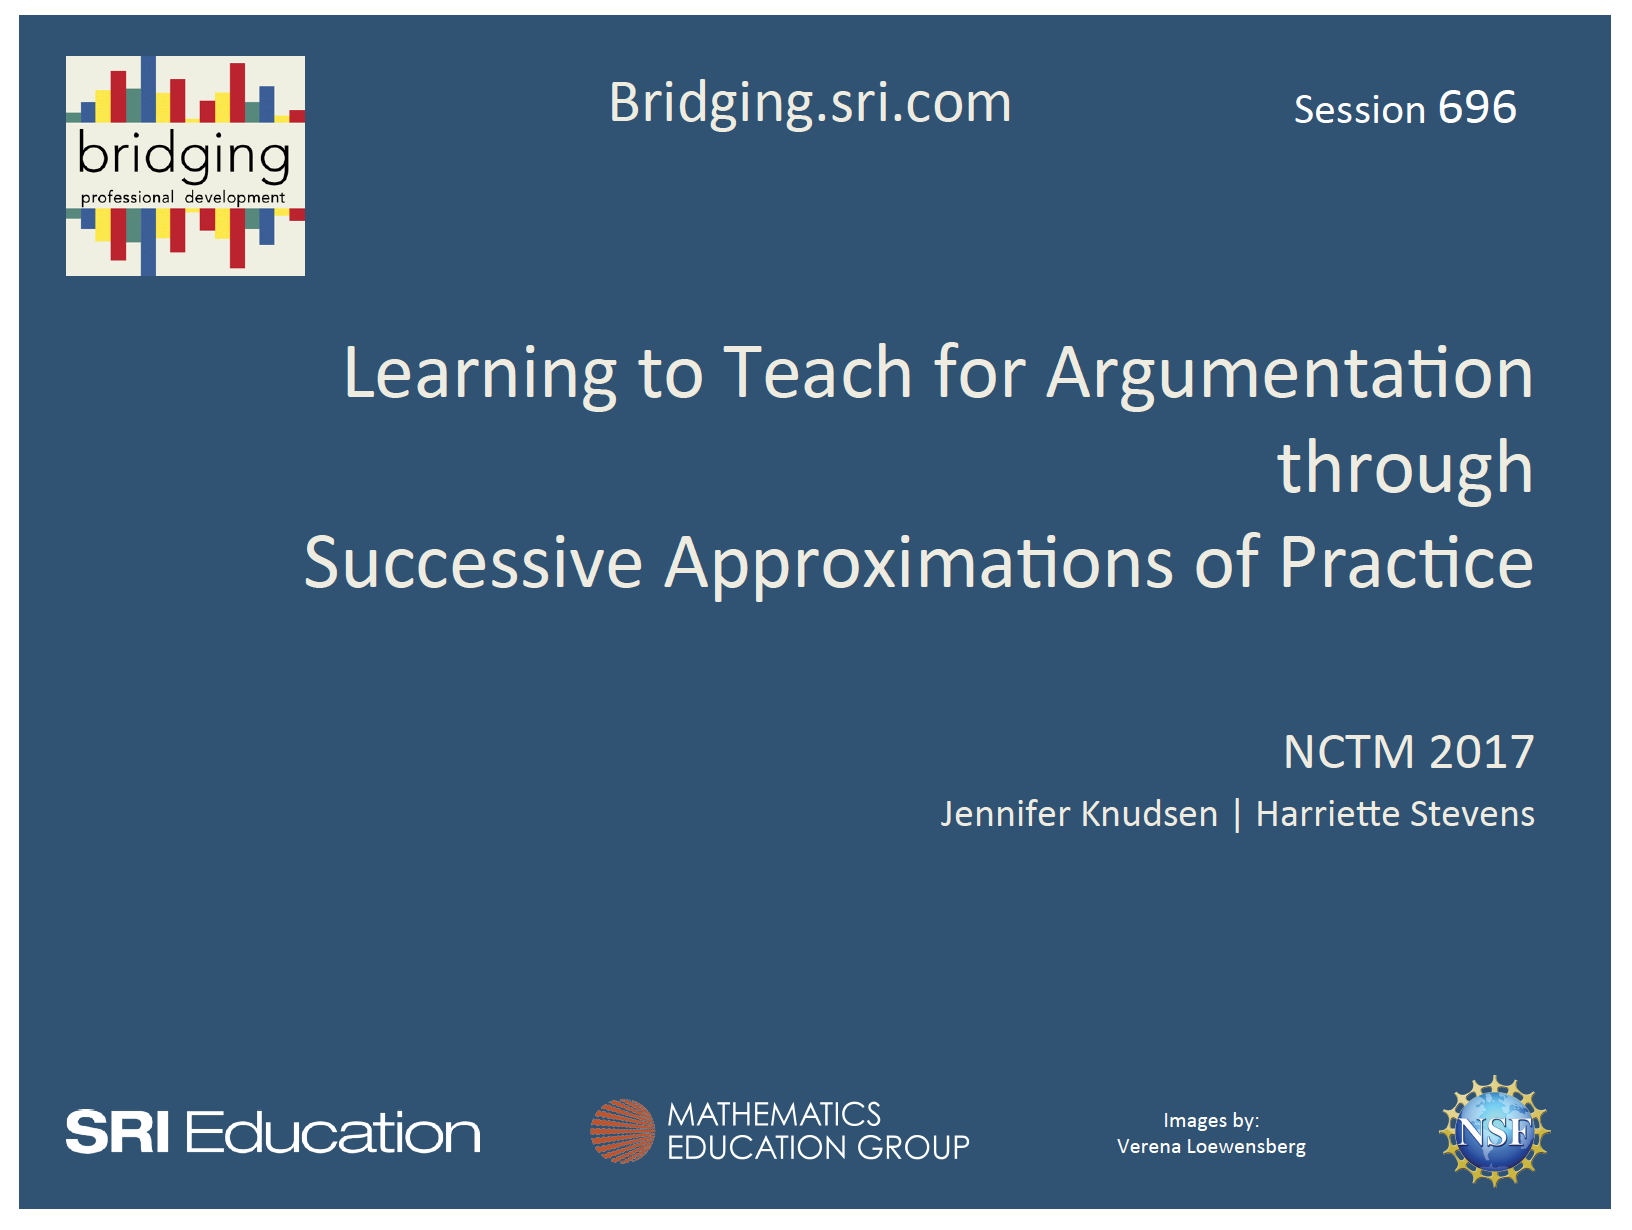 Learning to Teach for Argumentation through Successive Approximations of Practice presentation cover